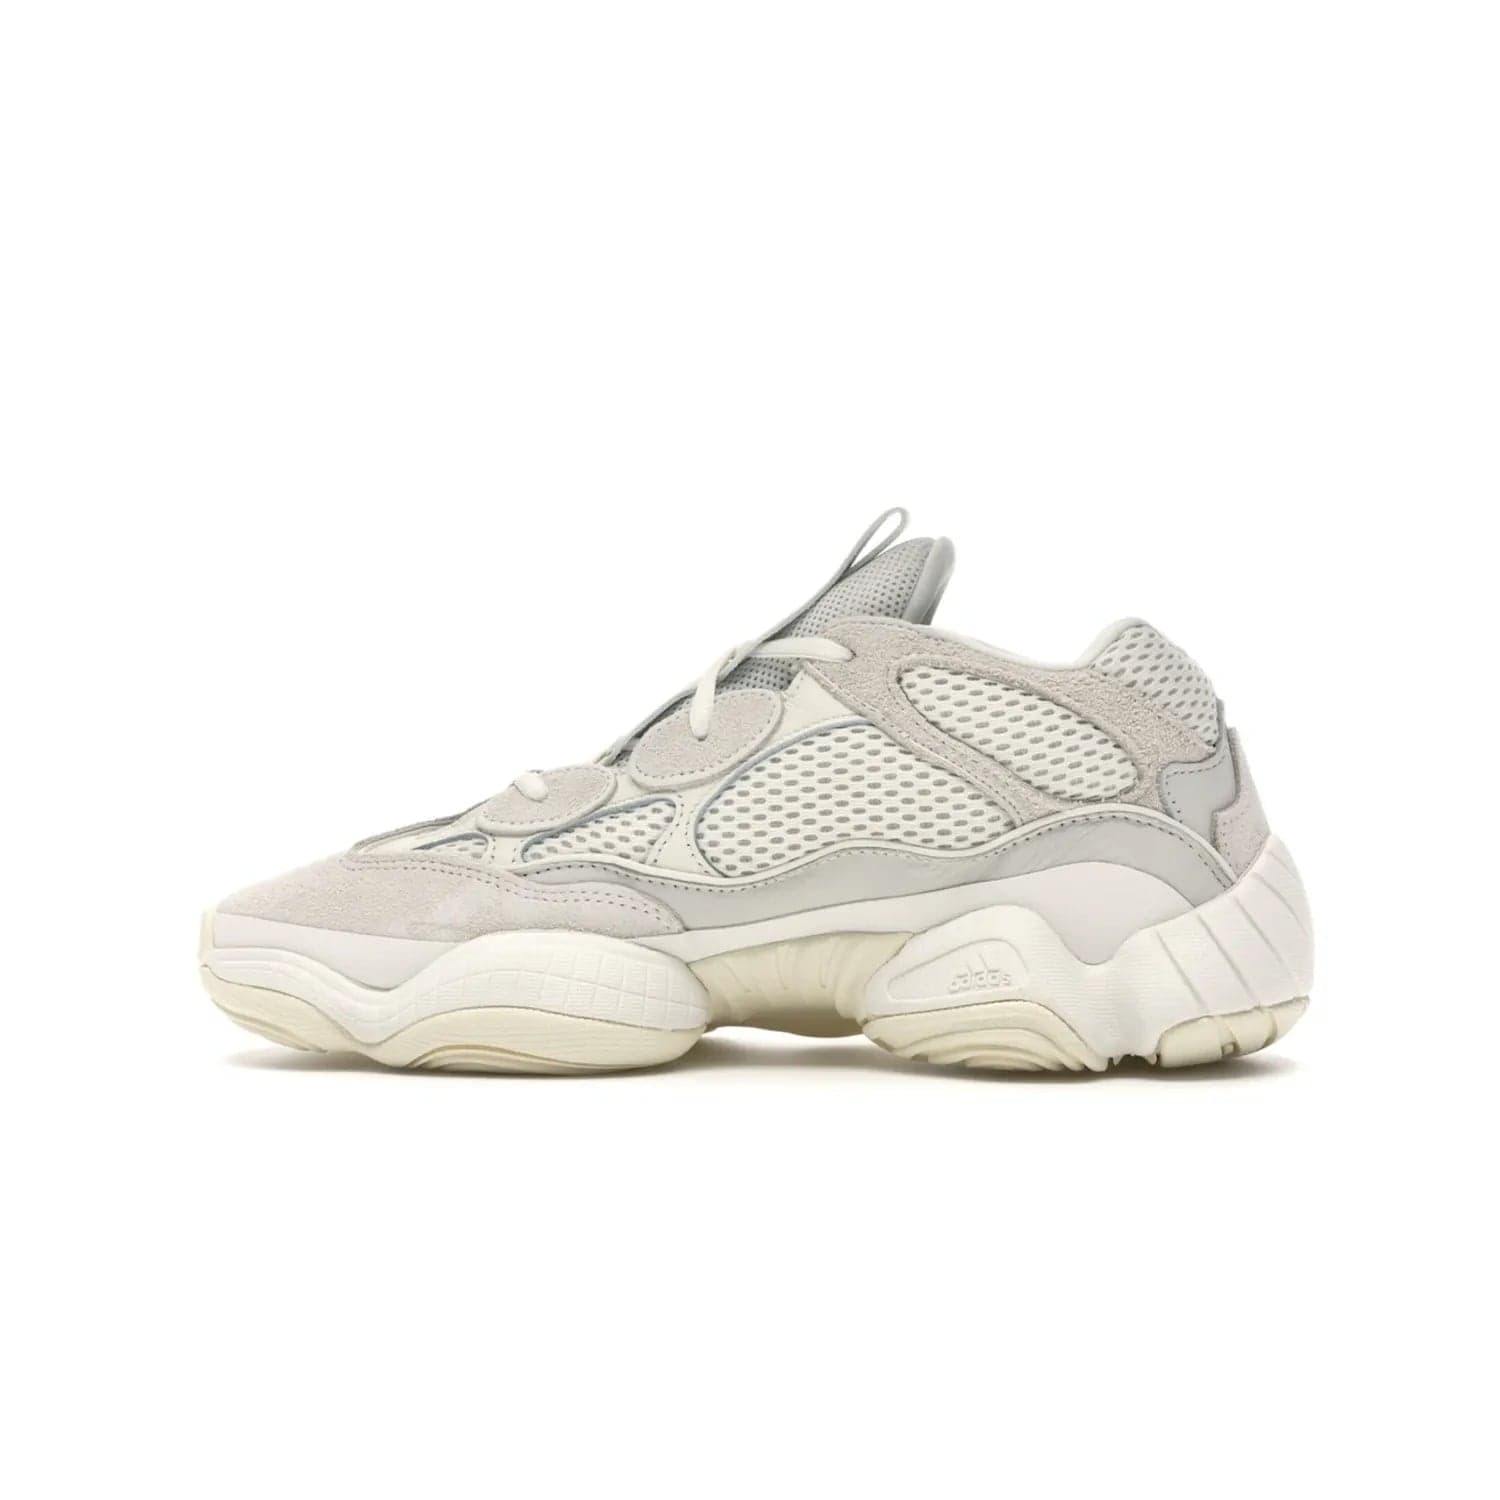 adidas Yeezy 500 Bone White - Image 20 - Only at www.BallersClubKickz.com - Classic look perfect for any sneaker collection. The adidas Yeezy 500 "Bone White" blends a white mesh upper with suede overlays & a chunky midsole inspired by the Adidas KB3. Complimented by a tonal-cream outsole, this timeless style is a must-have.